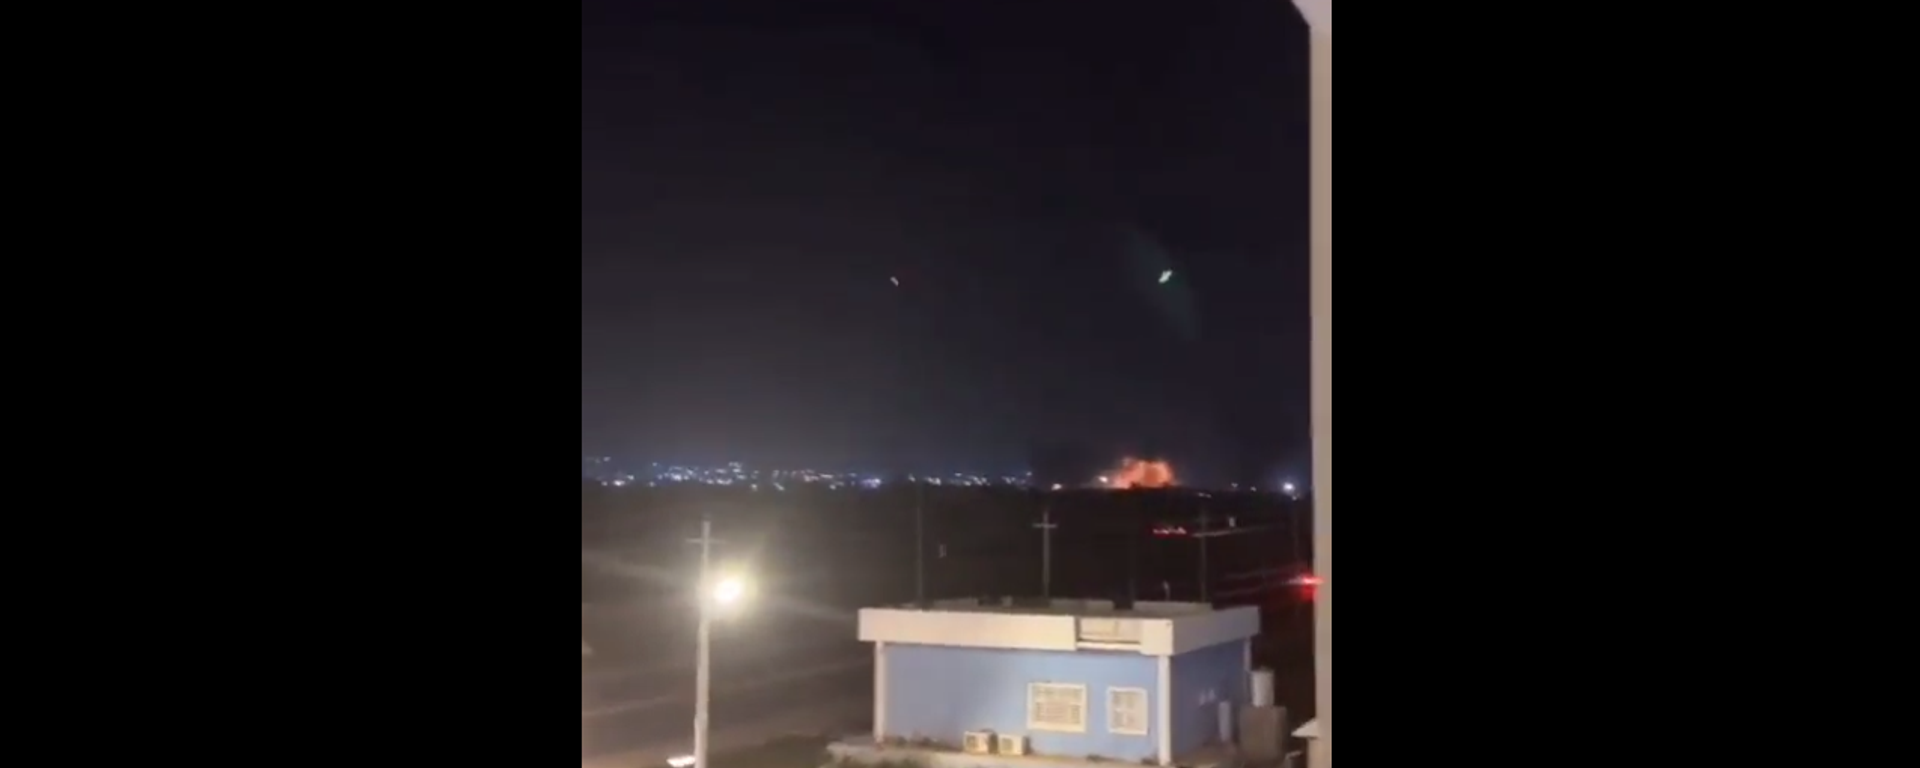 A screenshot from the video of an alleged airstrike in Erbil, Iraq on March 13, 2022. - Sputnik International, 1920, 12.03.2022